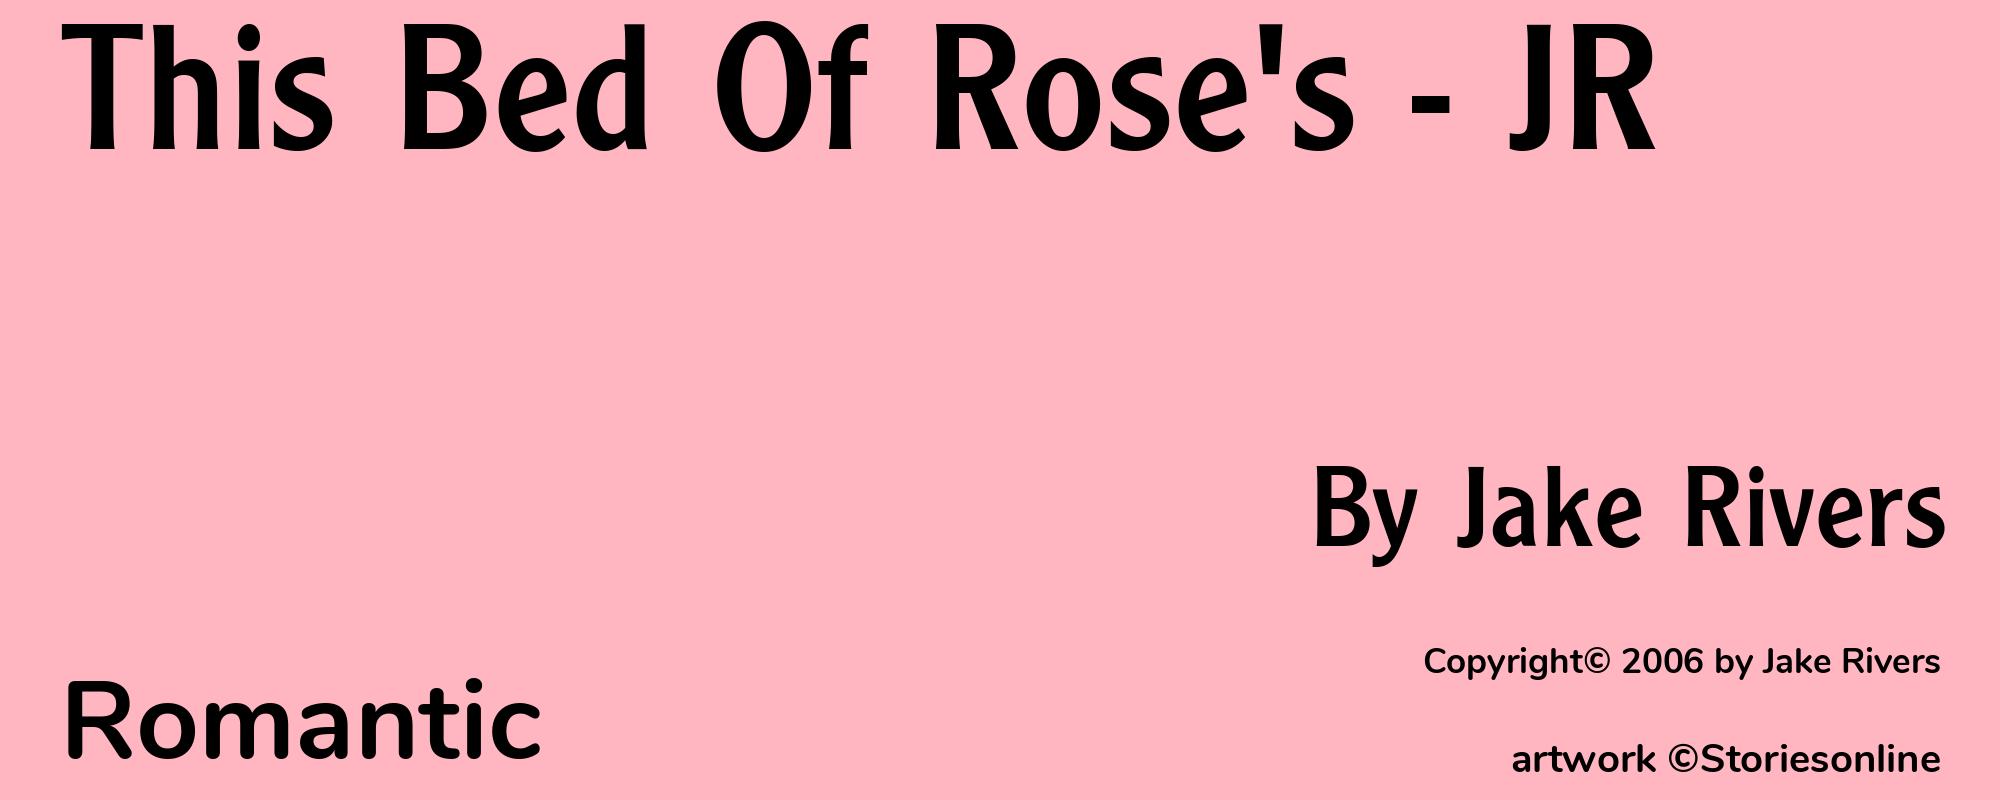 This Bed Of Rose's - JR - Cover